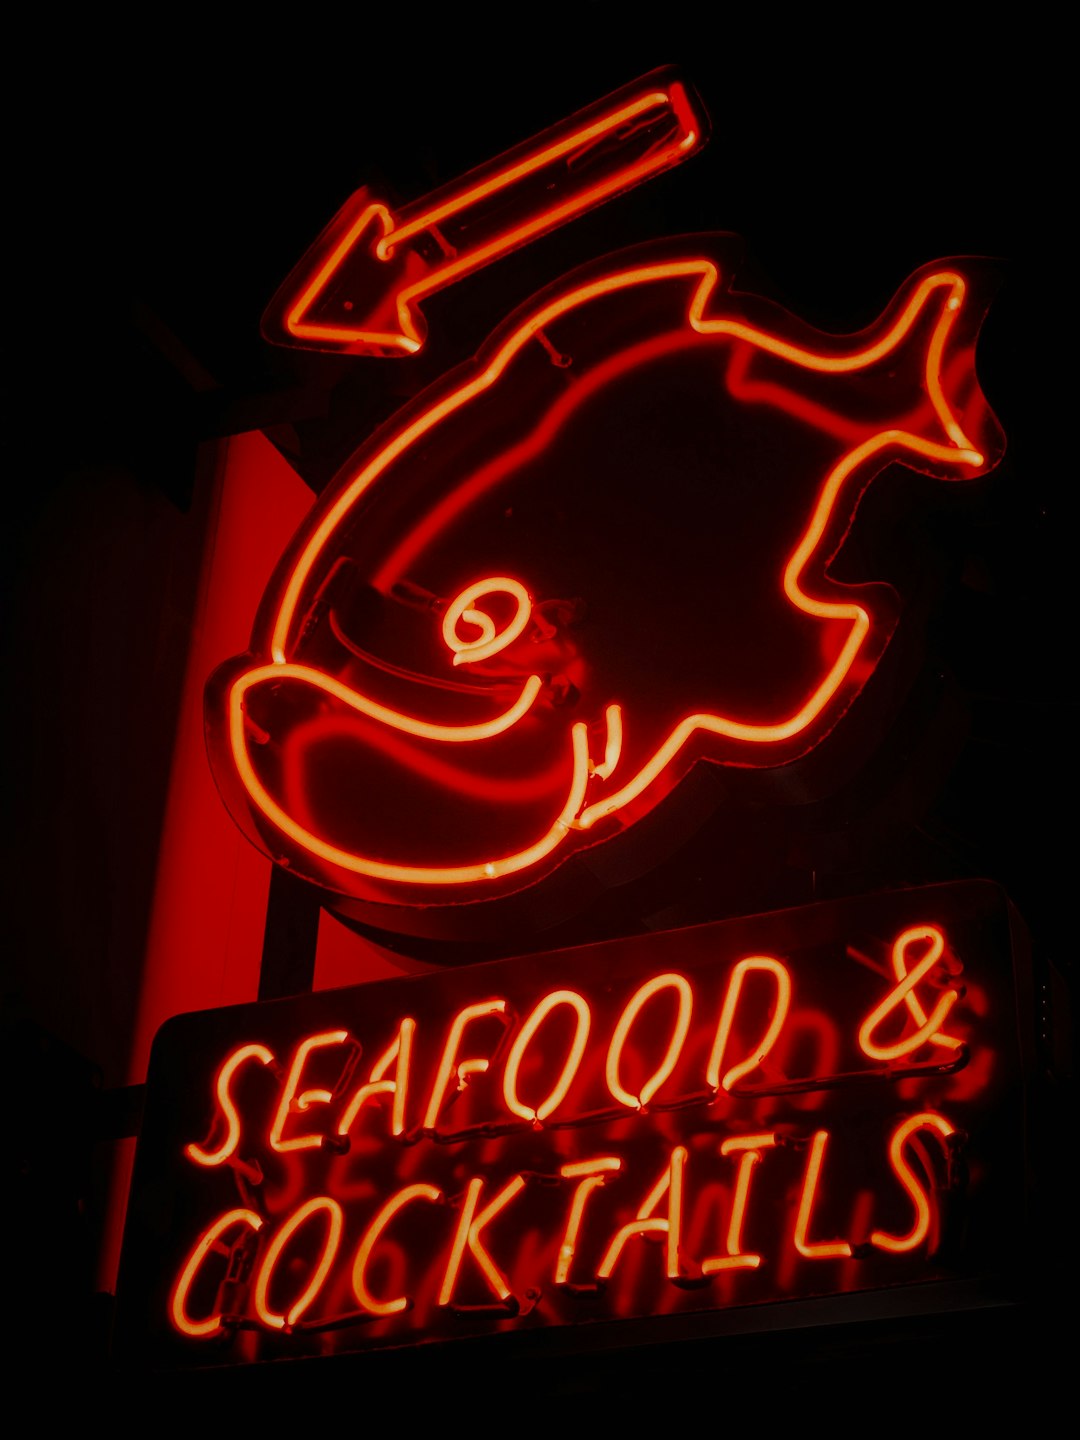 Seafood and Cocktails LED signage